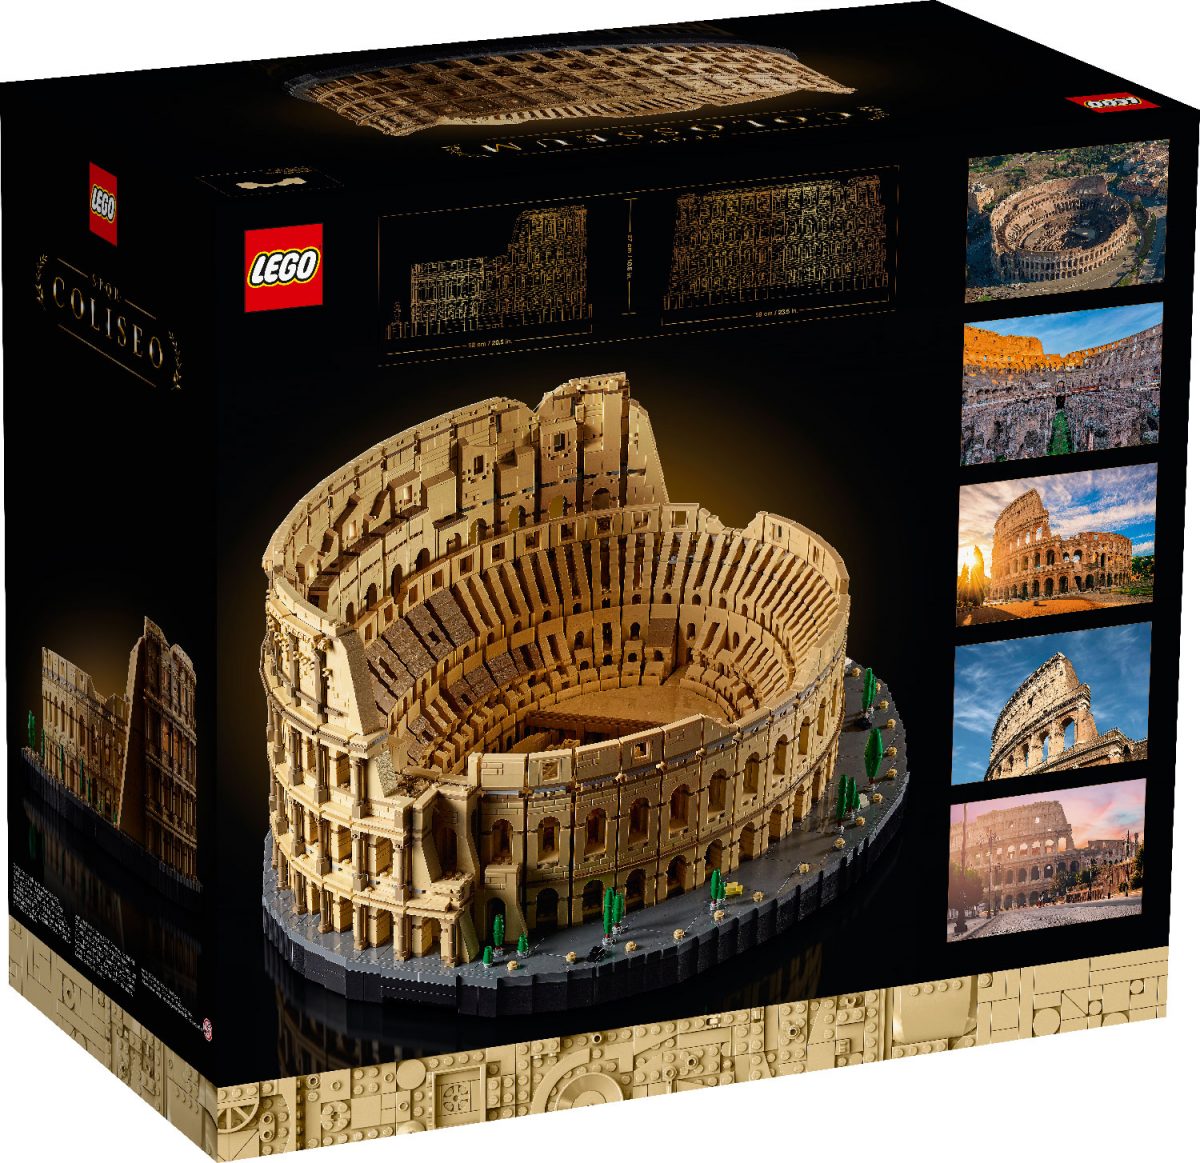 LEGO Colosseum (10276) Officially Unveiled As The Largest Set Ever